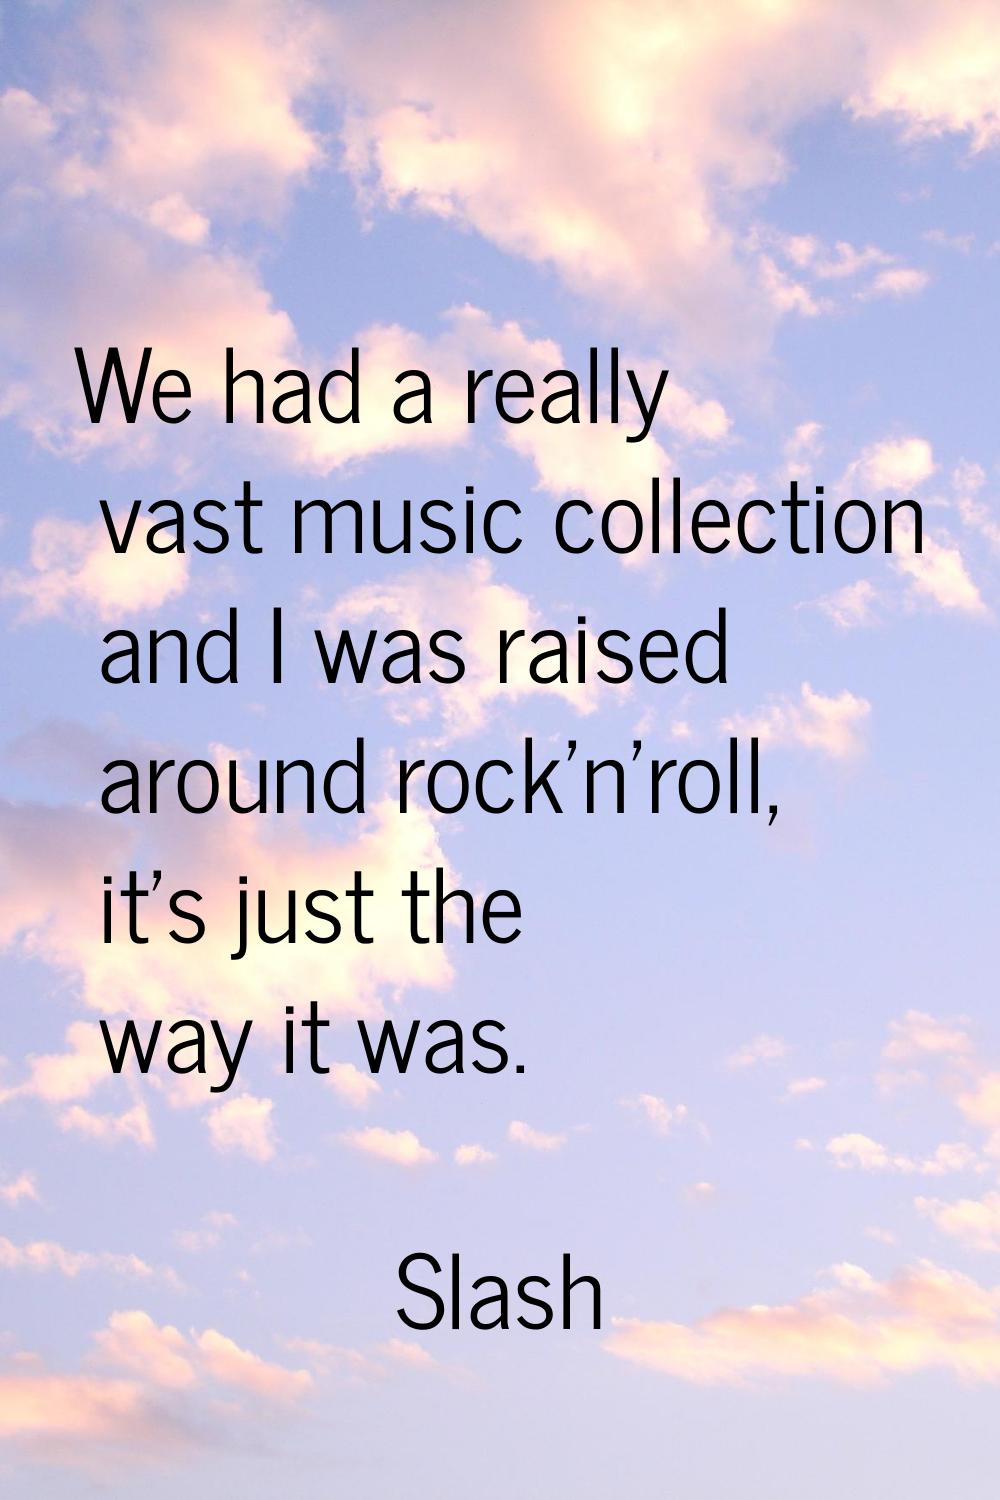 We had a really vast music collection and I was raised around rock'n'roll, it's just the way it was